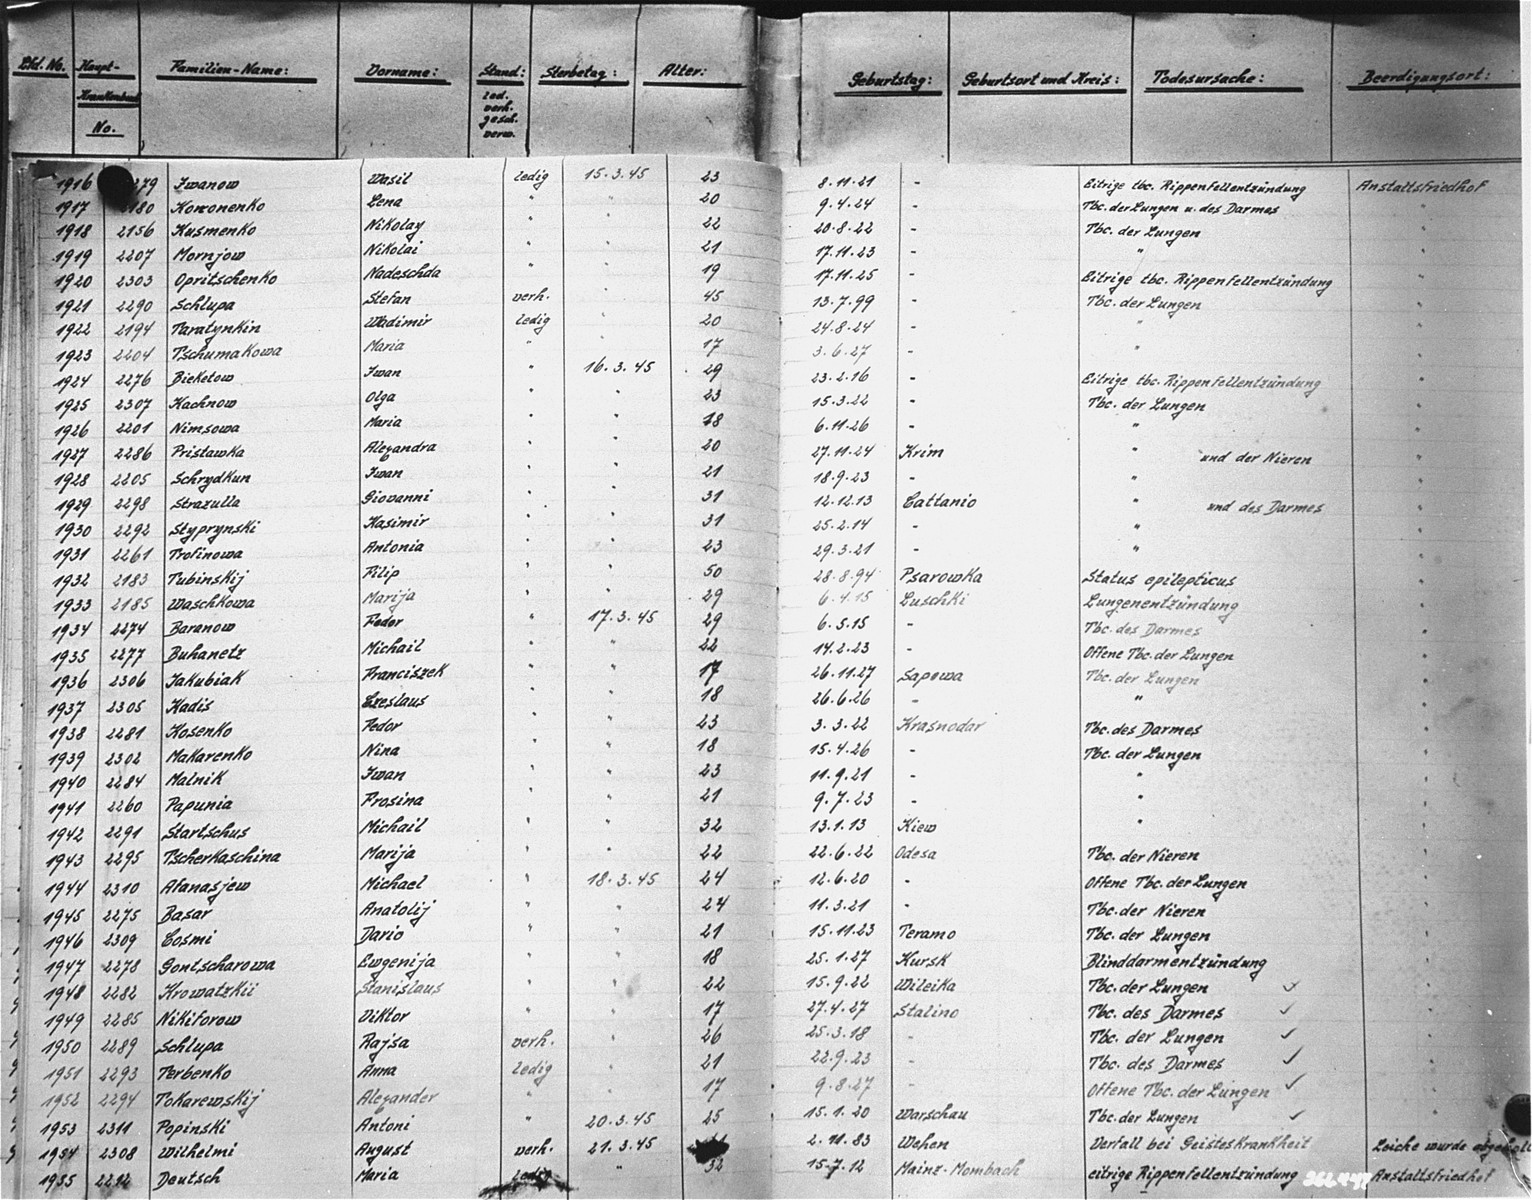 A page of the Hadamar Institute's death register in which the causes of death were faked to conceal the euthanasia killings that took place there.

The photograph was taken by an American military photographer soon after the liberation.